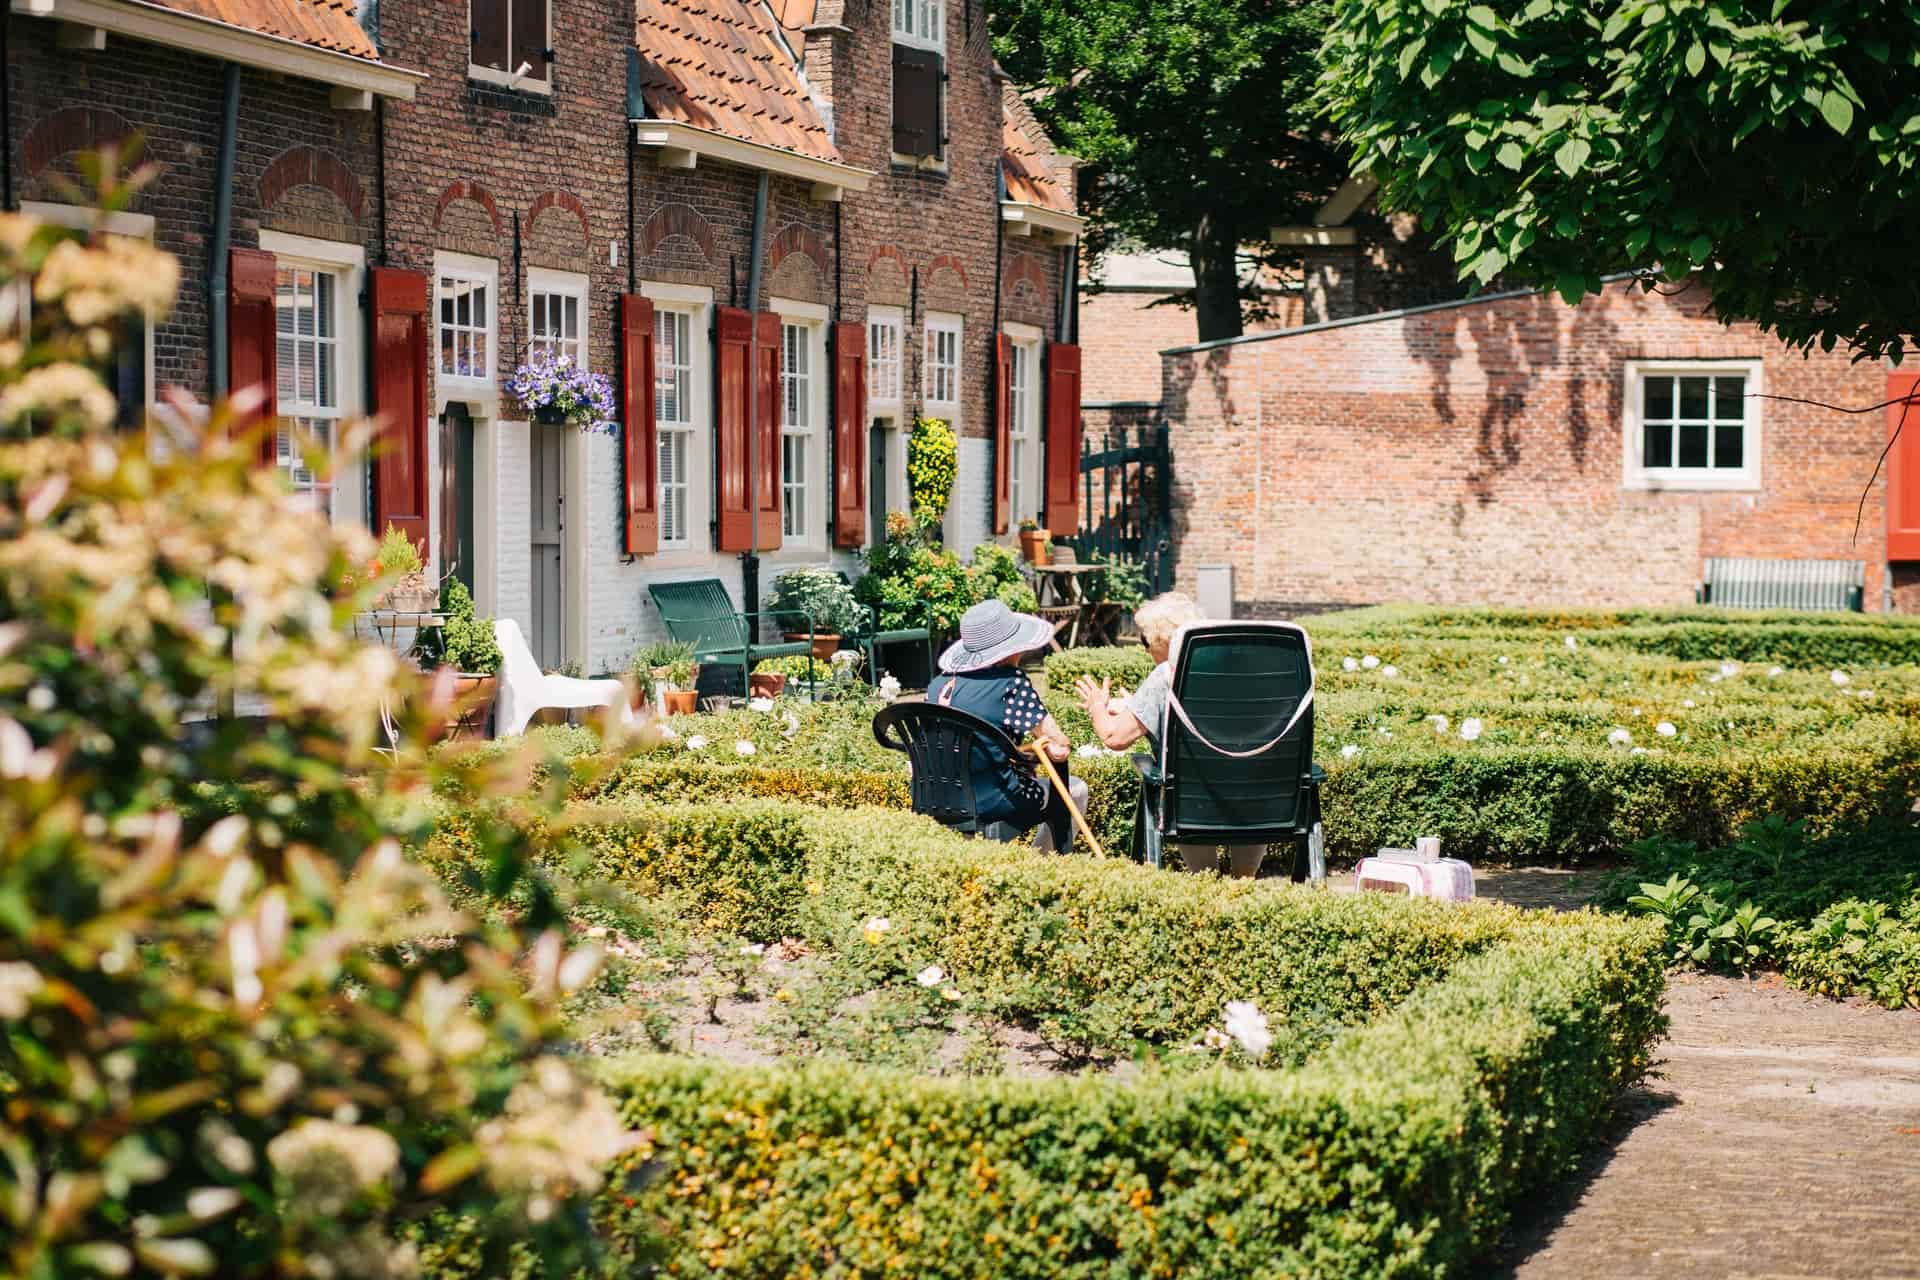 Two elderly people sitting in a garden outside a row of houses with brick facades on a sunny day.